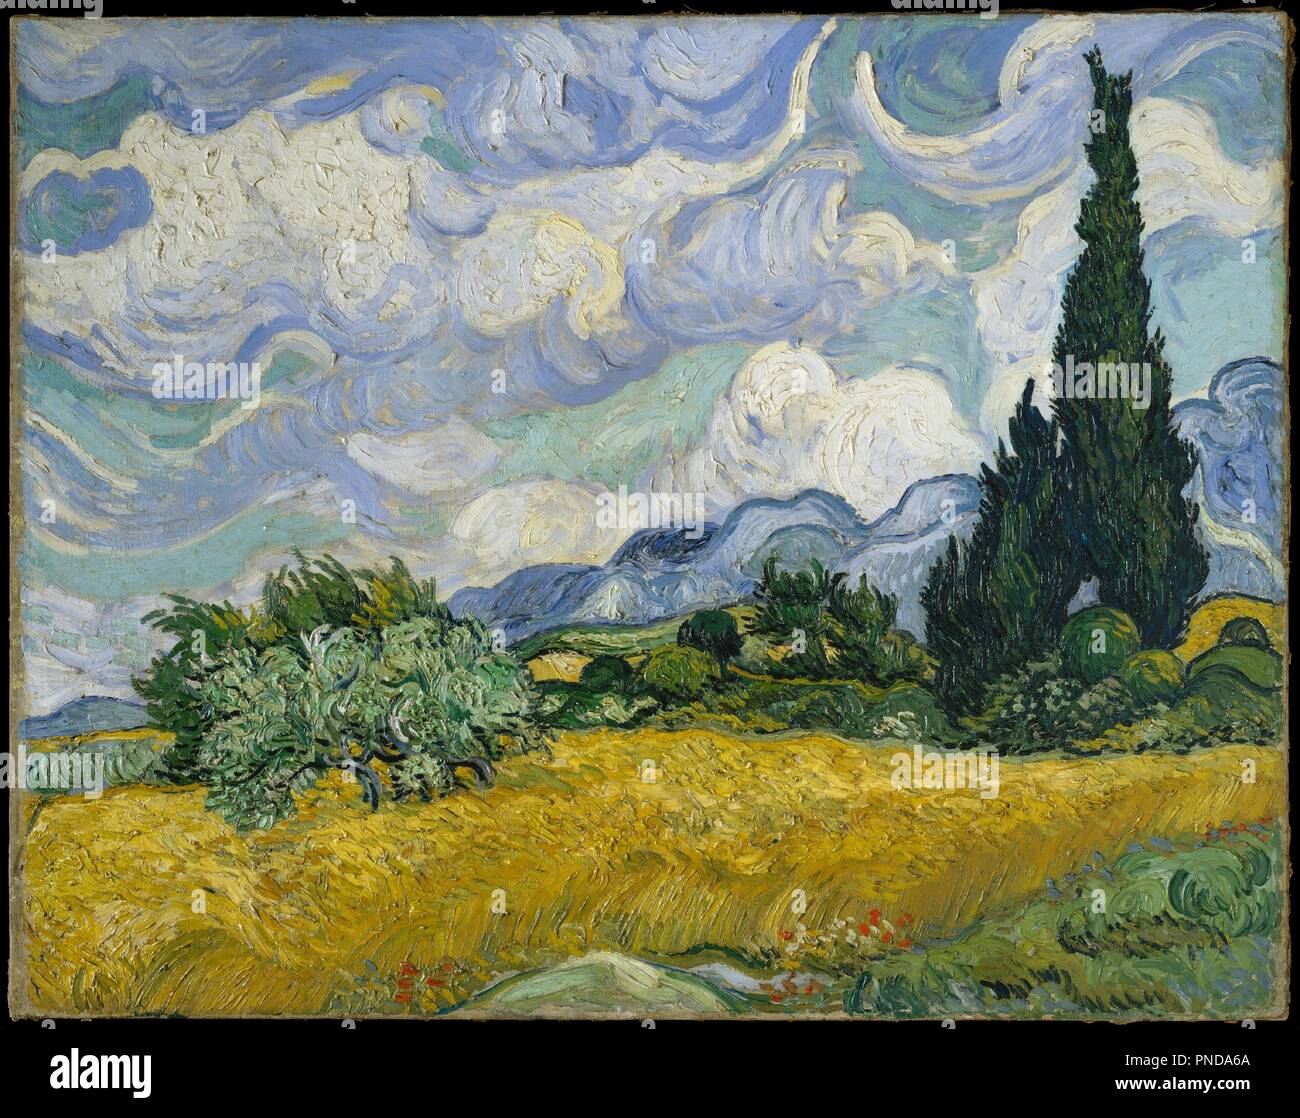 Wheat Field with Cypresses. Artist: Vincent van Gogh (Dutch, Zundert 1853-1890 Auvers-sur-Oise). Dimensions: 28 7/8 × 36 3/4 in. (73.2 × 93.4 cm). Date: 1889.  Cypresses gained ground in Van Gogh's work by late June 1889 when he resolved to devote one of his first series in Saint-Rémy to the towering trees. Distinctive for their rich impasto, his exuberant on-the-spot studies include the Met's close-up vertical view of cypresses (49.30) and this majestic horizontal composition, which he illustrated in reed-pen drawings sent to his brother on July 2. Van Gogh regarded the present work as one of Stock Photo